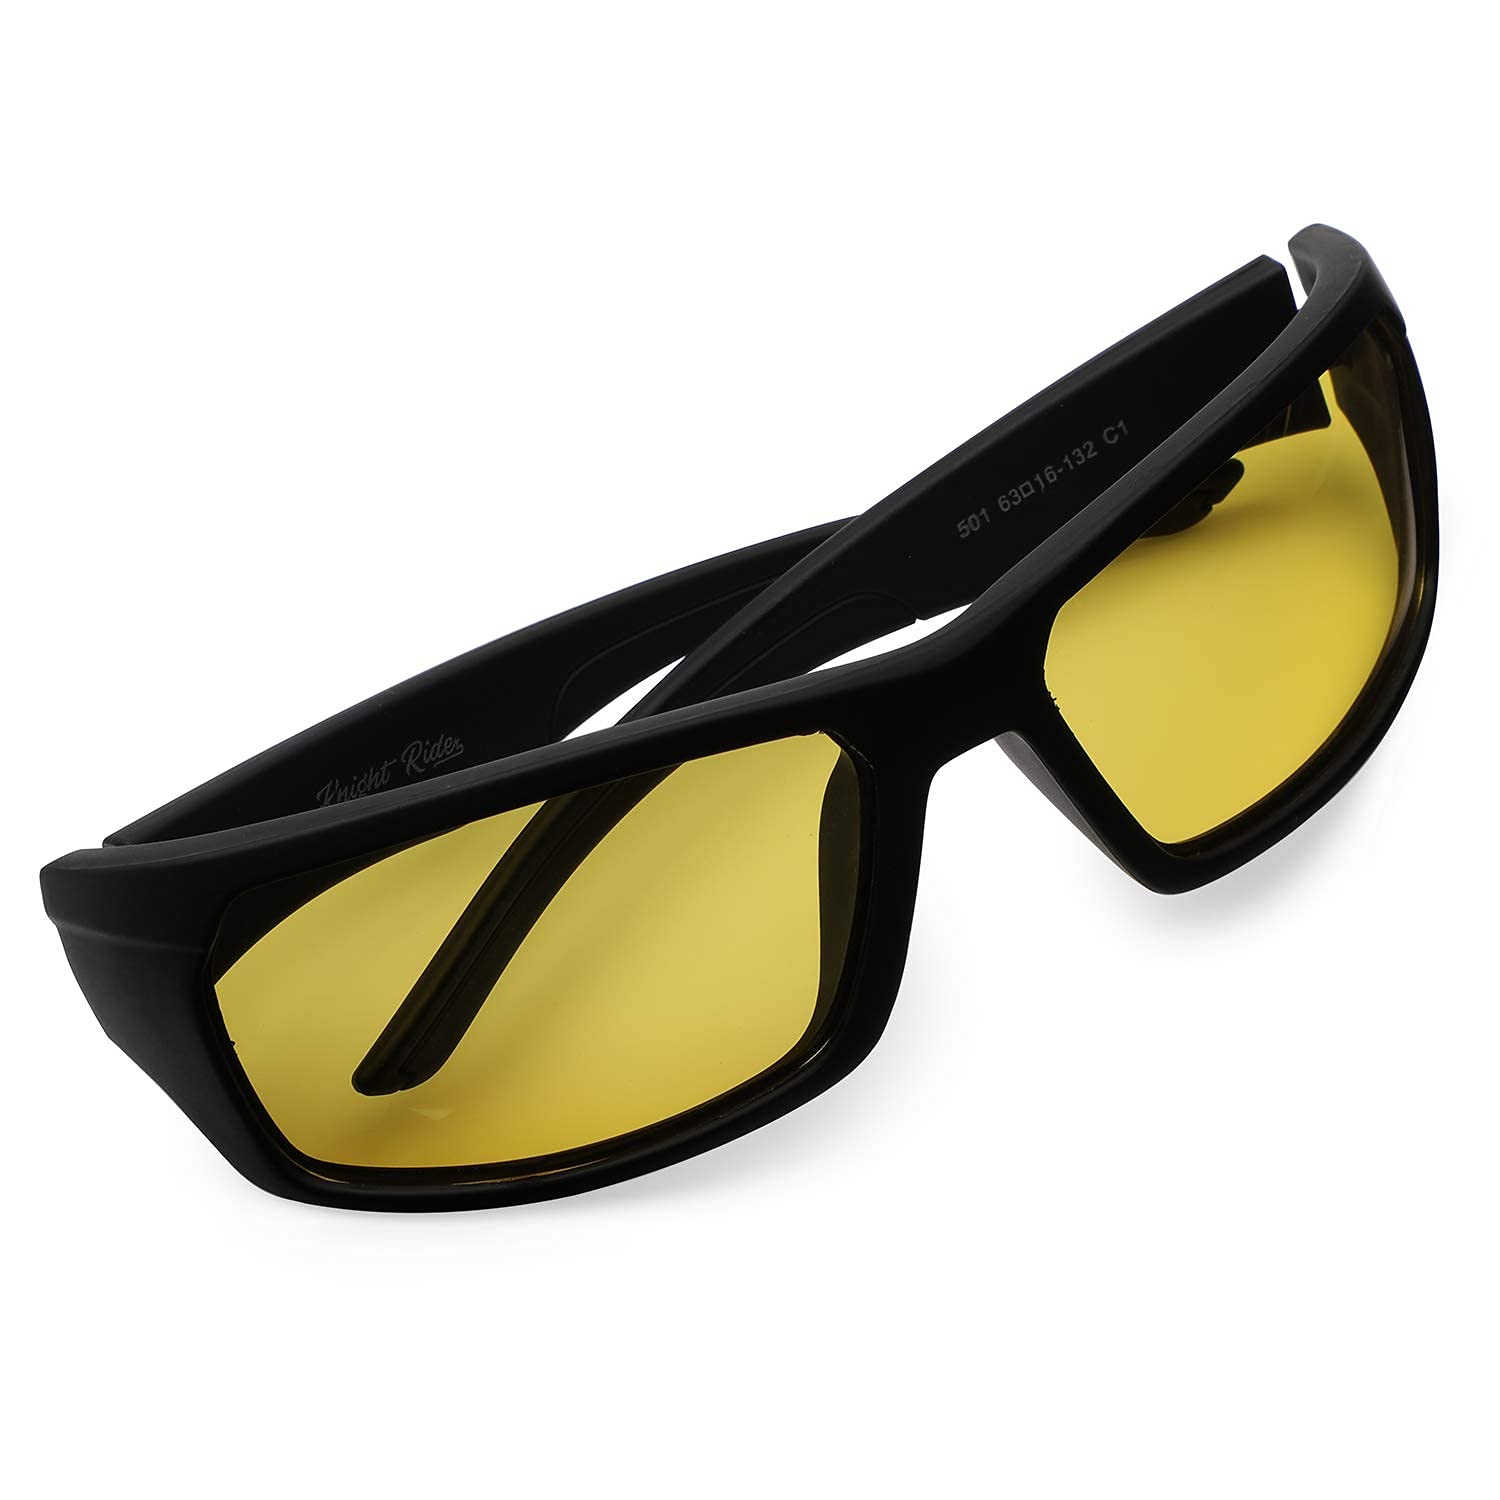 Sunglasses PNG Transparent Images - PNG All